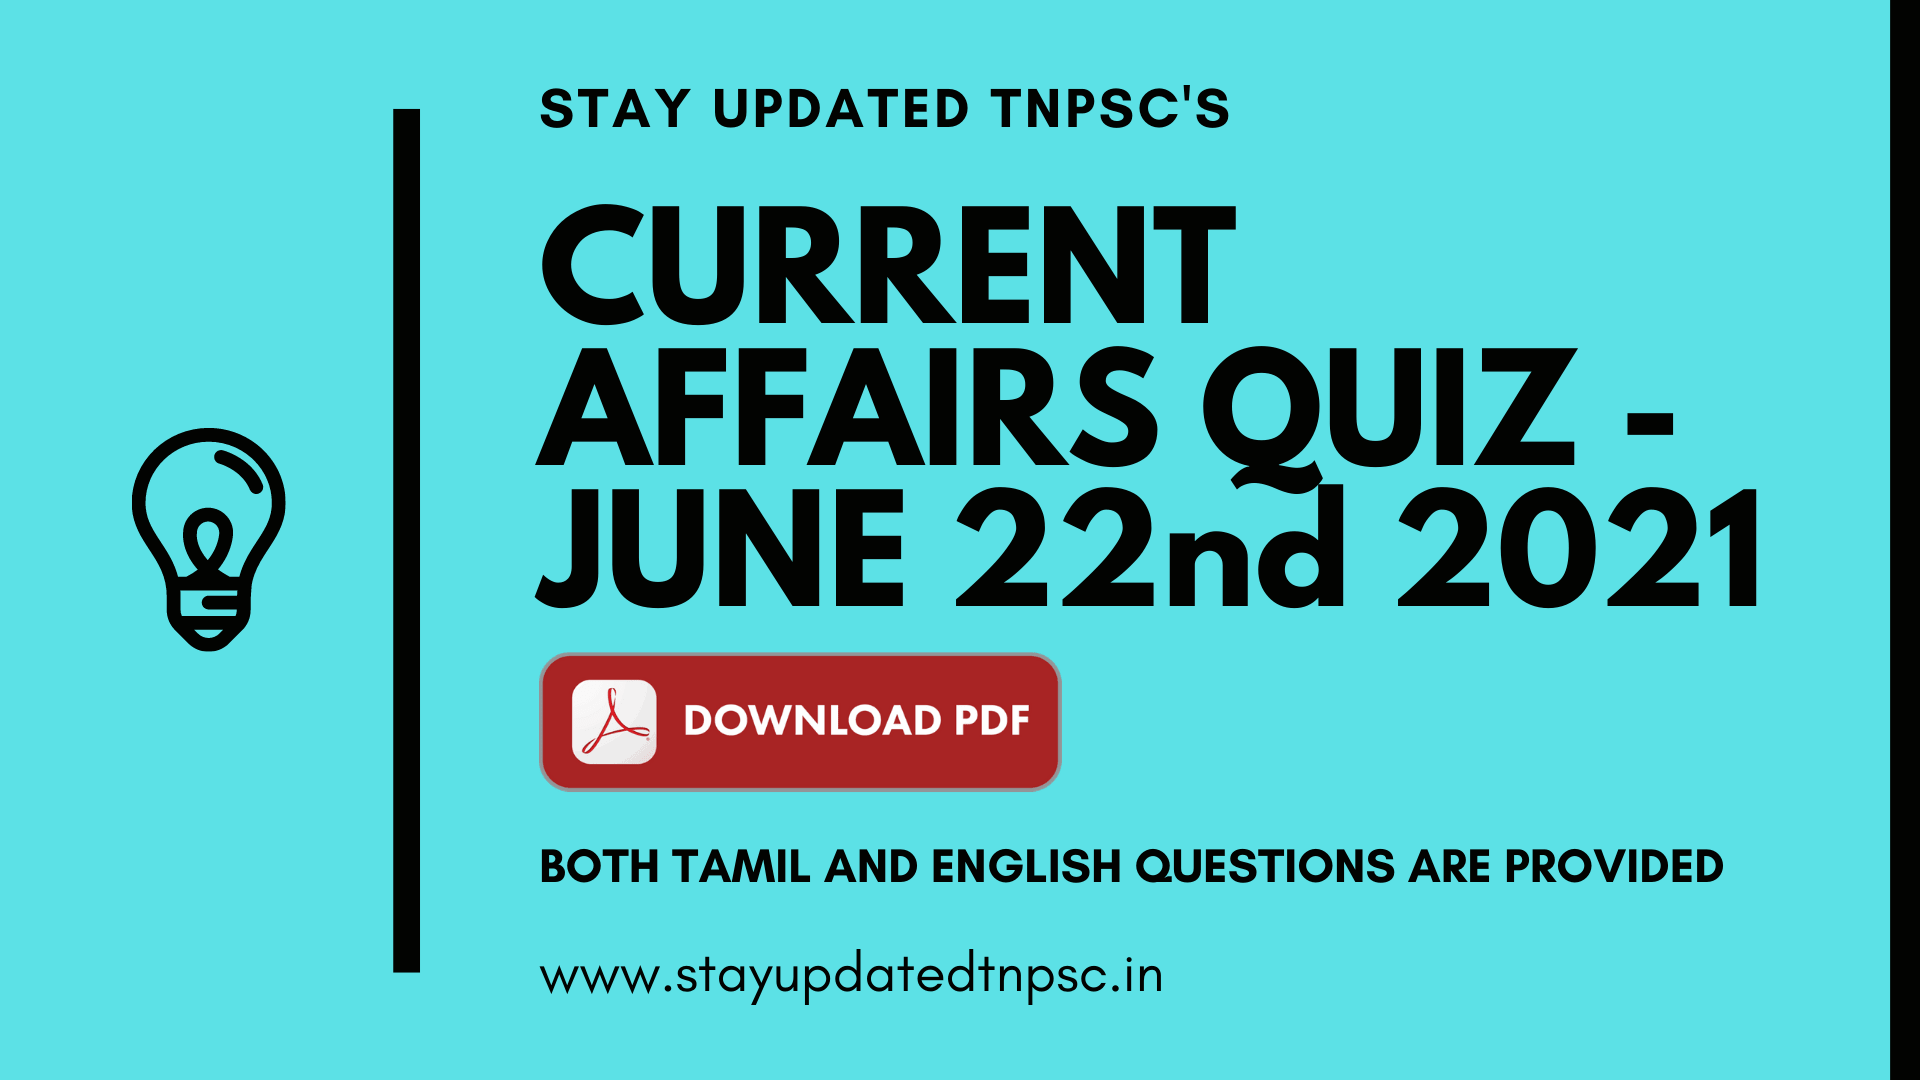 TNPSC DAILY CURRENT AFFAIRS: 22 JUNE 2021 TNPSC தினசரி நடப்பு நிகழ்வுகள்: 22 ஜூன் 2021 BOTH TAMIL AND ENGLISH QUESTIONS ARE PROVIDED DOWNLOAD PDF AT THE END OF THE QUESTIONS